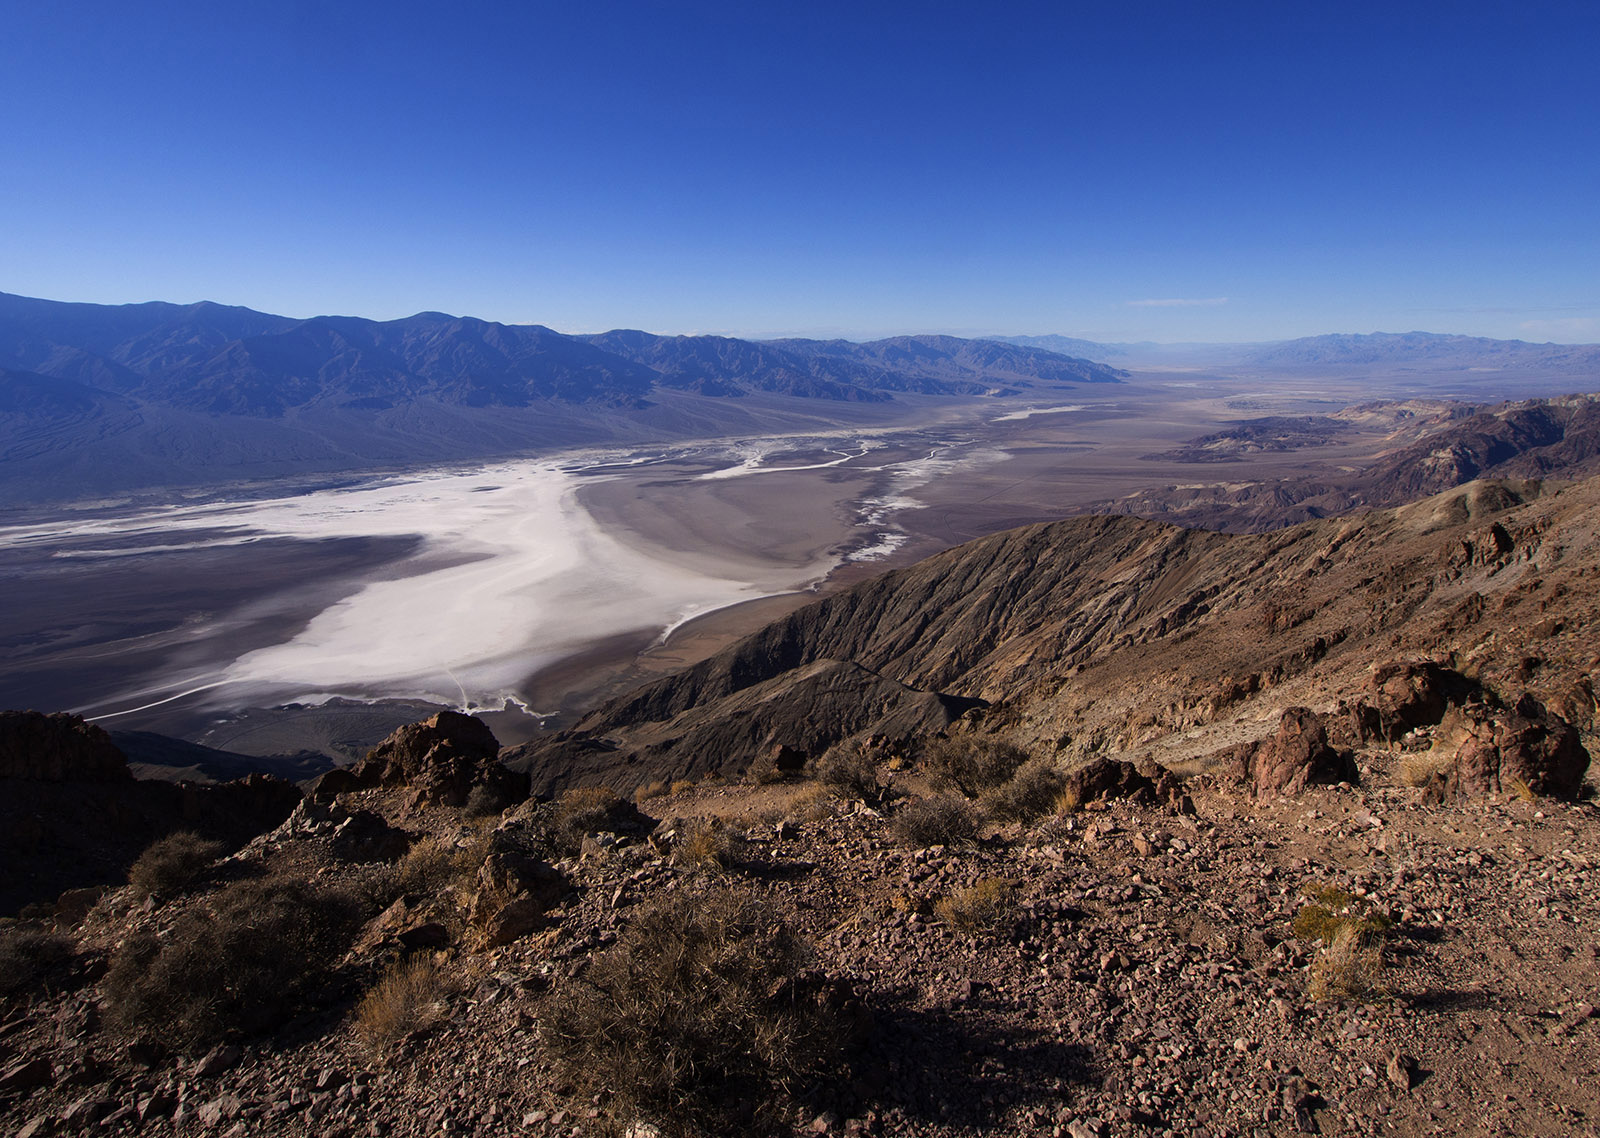 Dante's View from Black Mountains facing North overlooking Badwater Basin (lowest point in Death Valley).  Panamint Mountains and their alluvial fans in the distance.  Badwater Alluvial fan visible at bottom left.